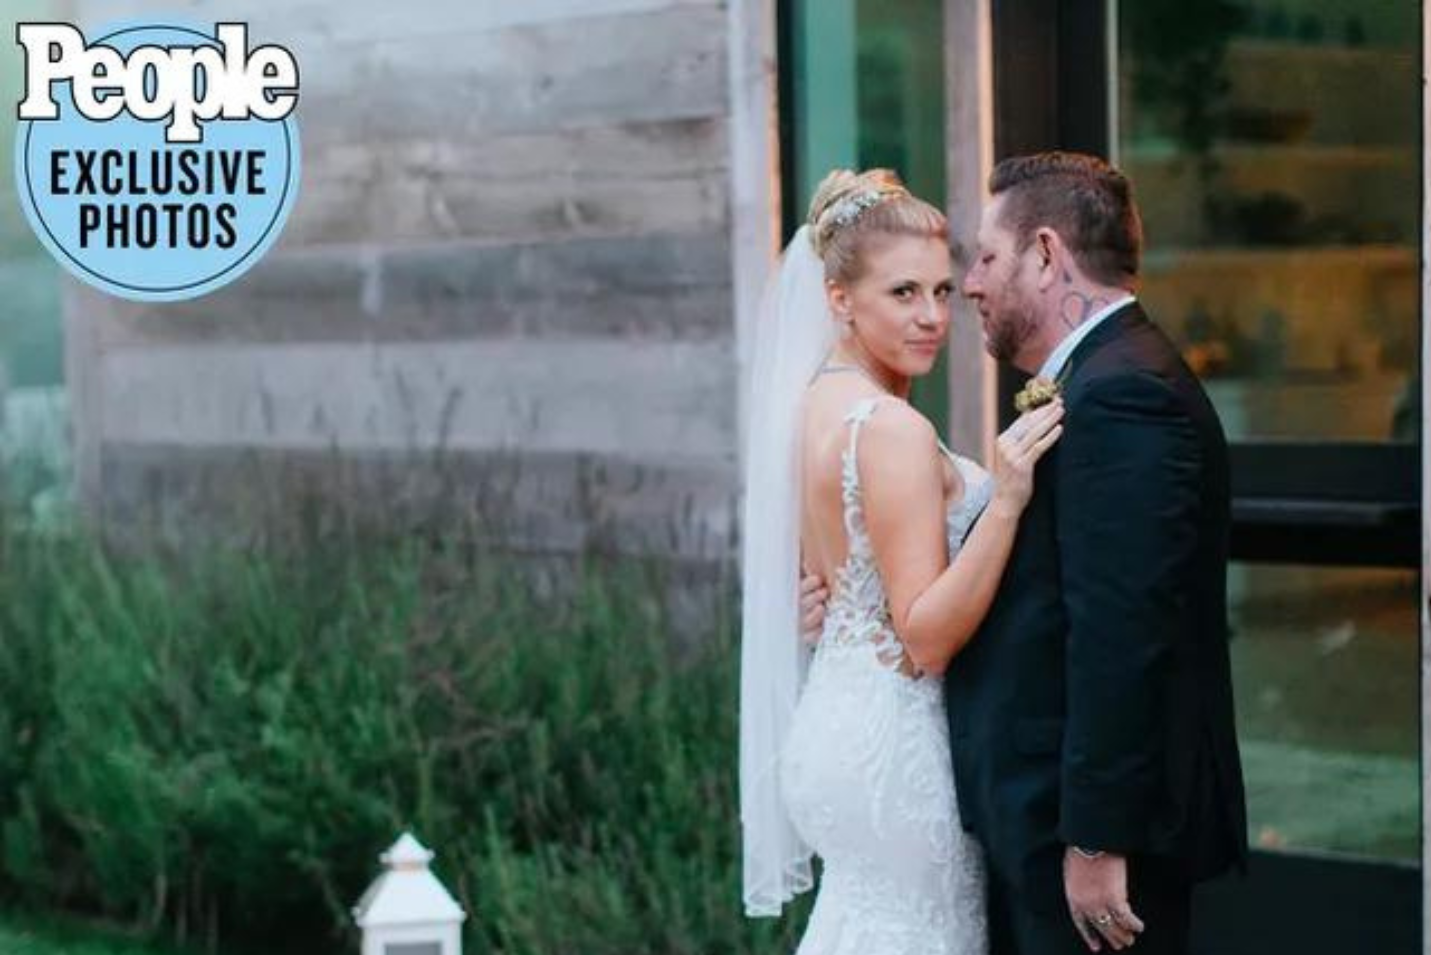 Jodie Sweetin Says She Picked the First Wedding Dress She Tried On: 'It Was Perfect'!